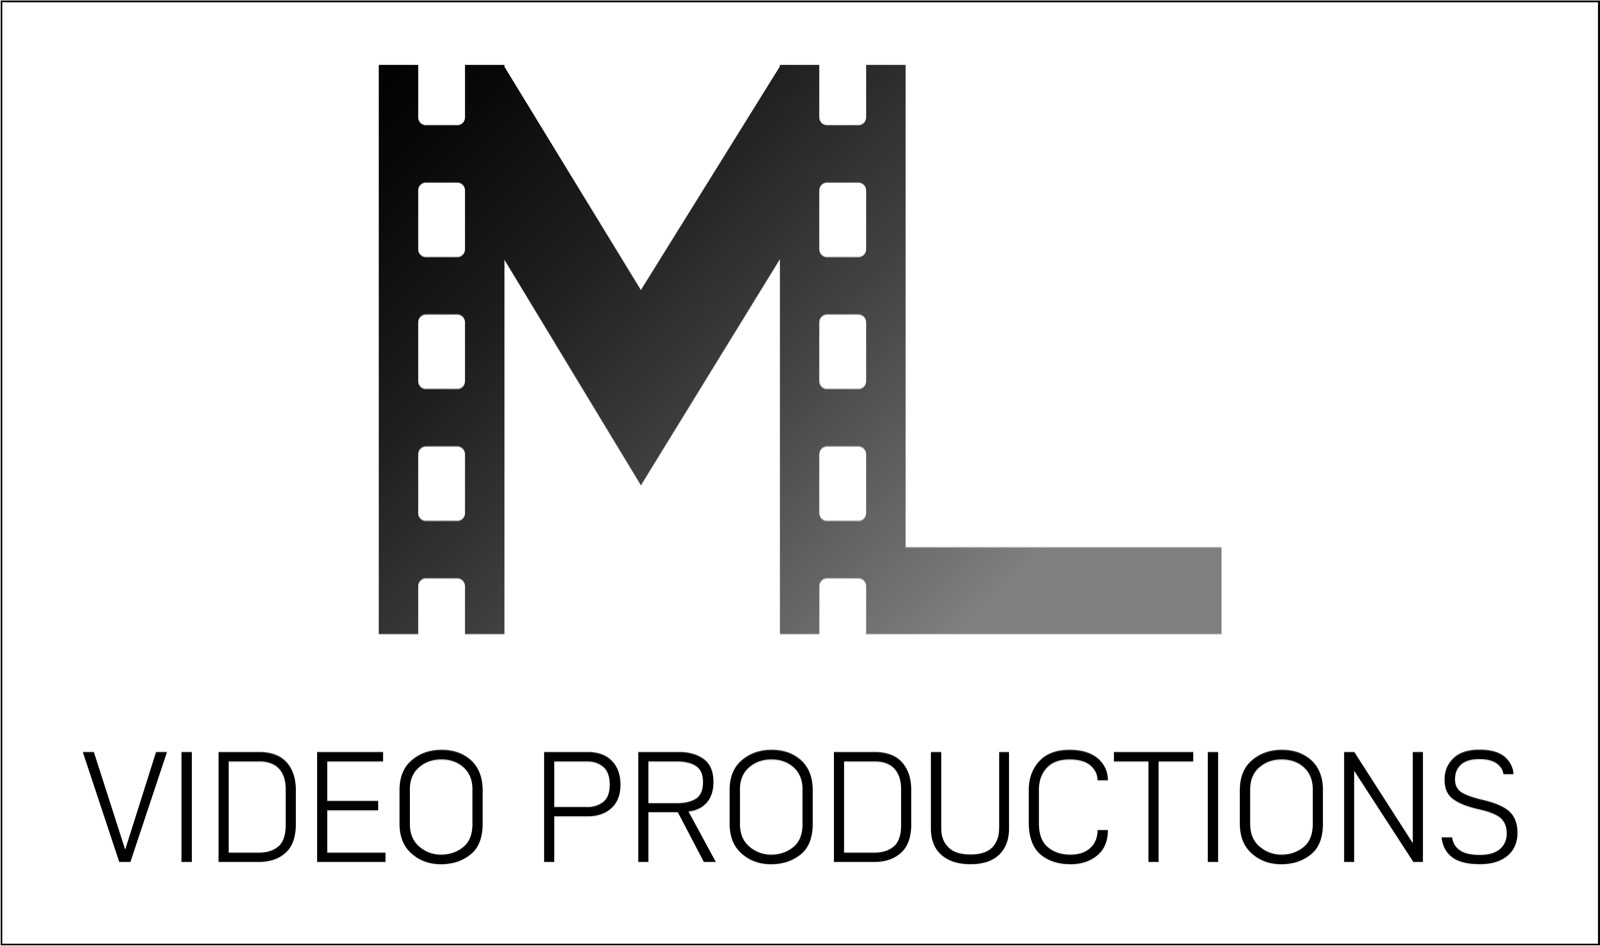 LM Video Productions